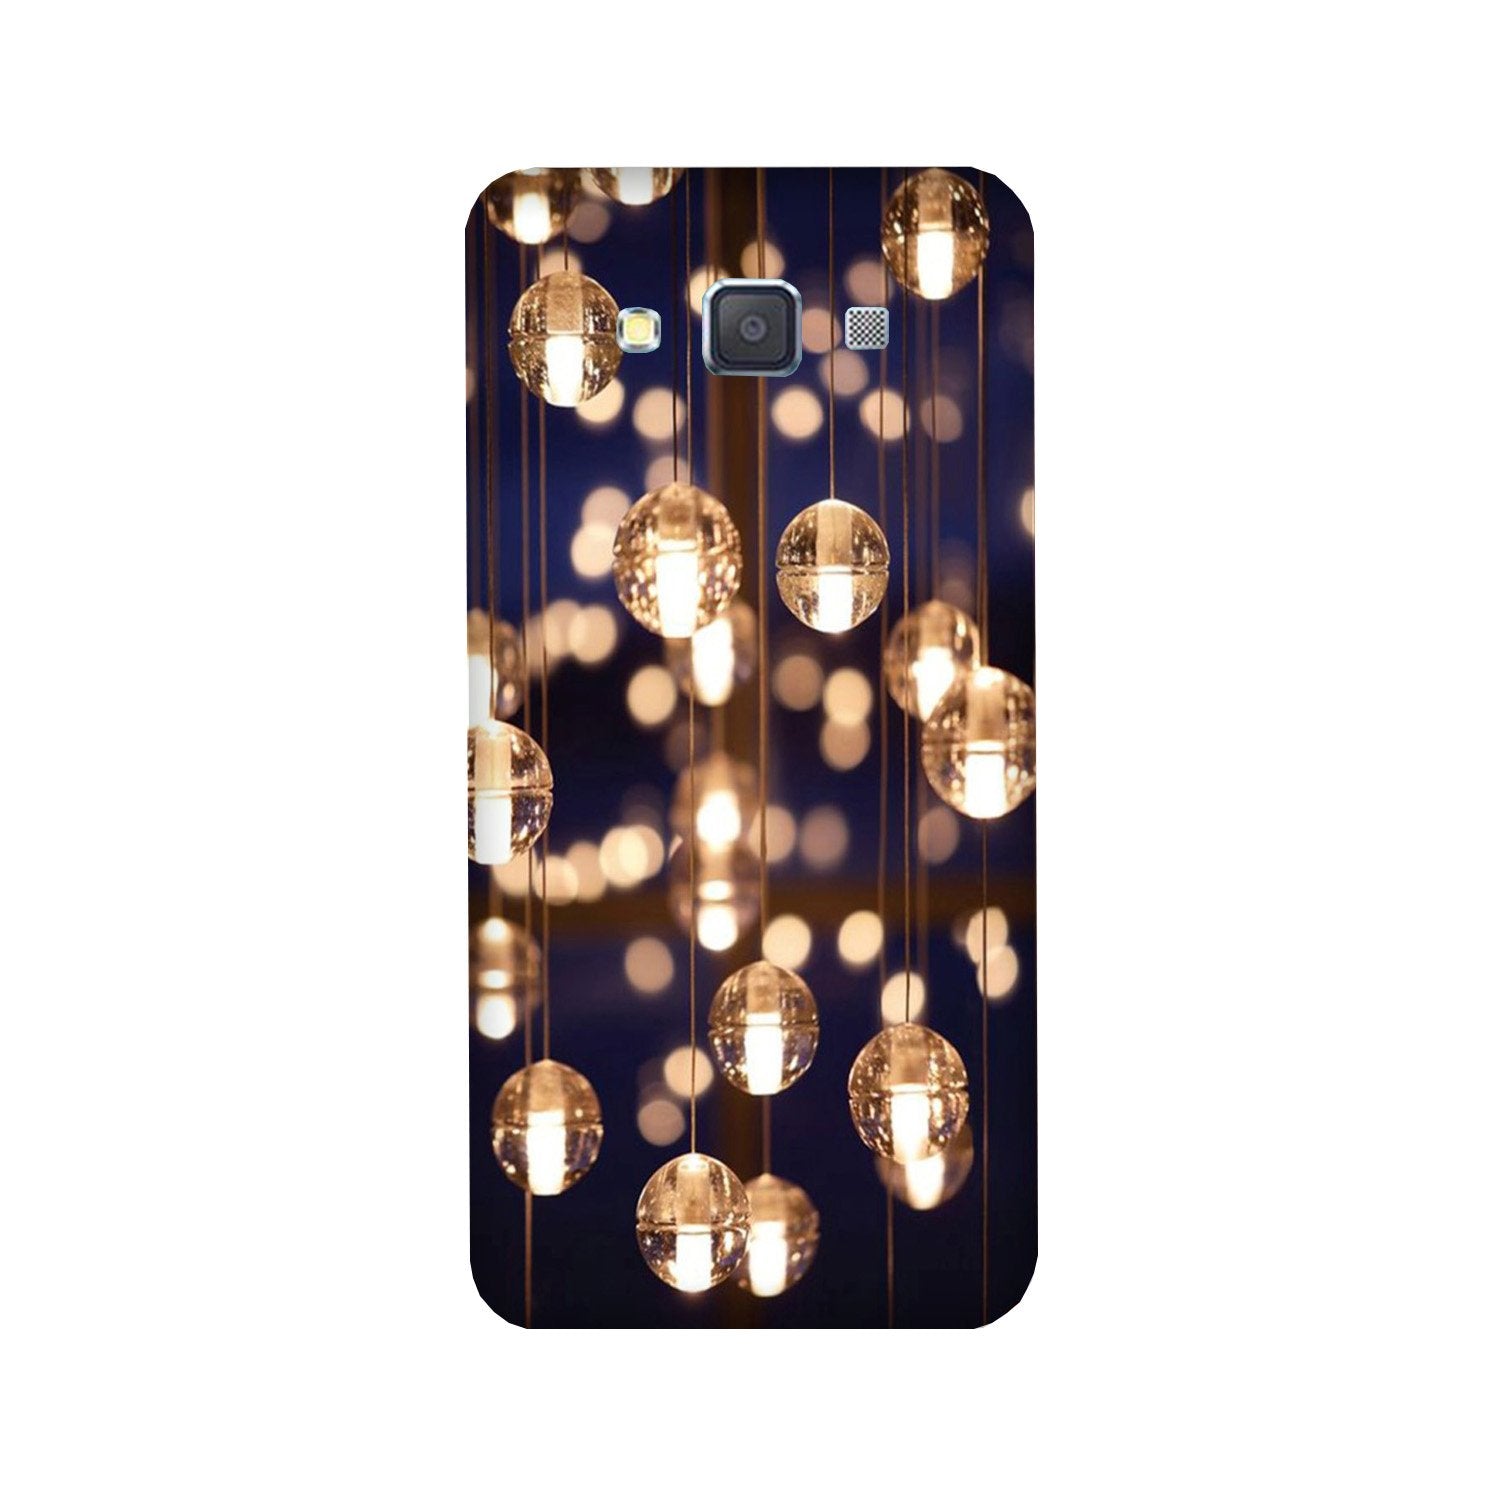 Party Bulb2 Case for Galaxy A3 (2015)